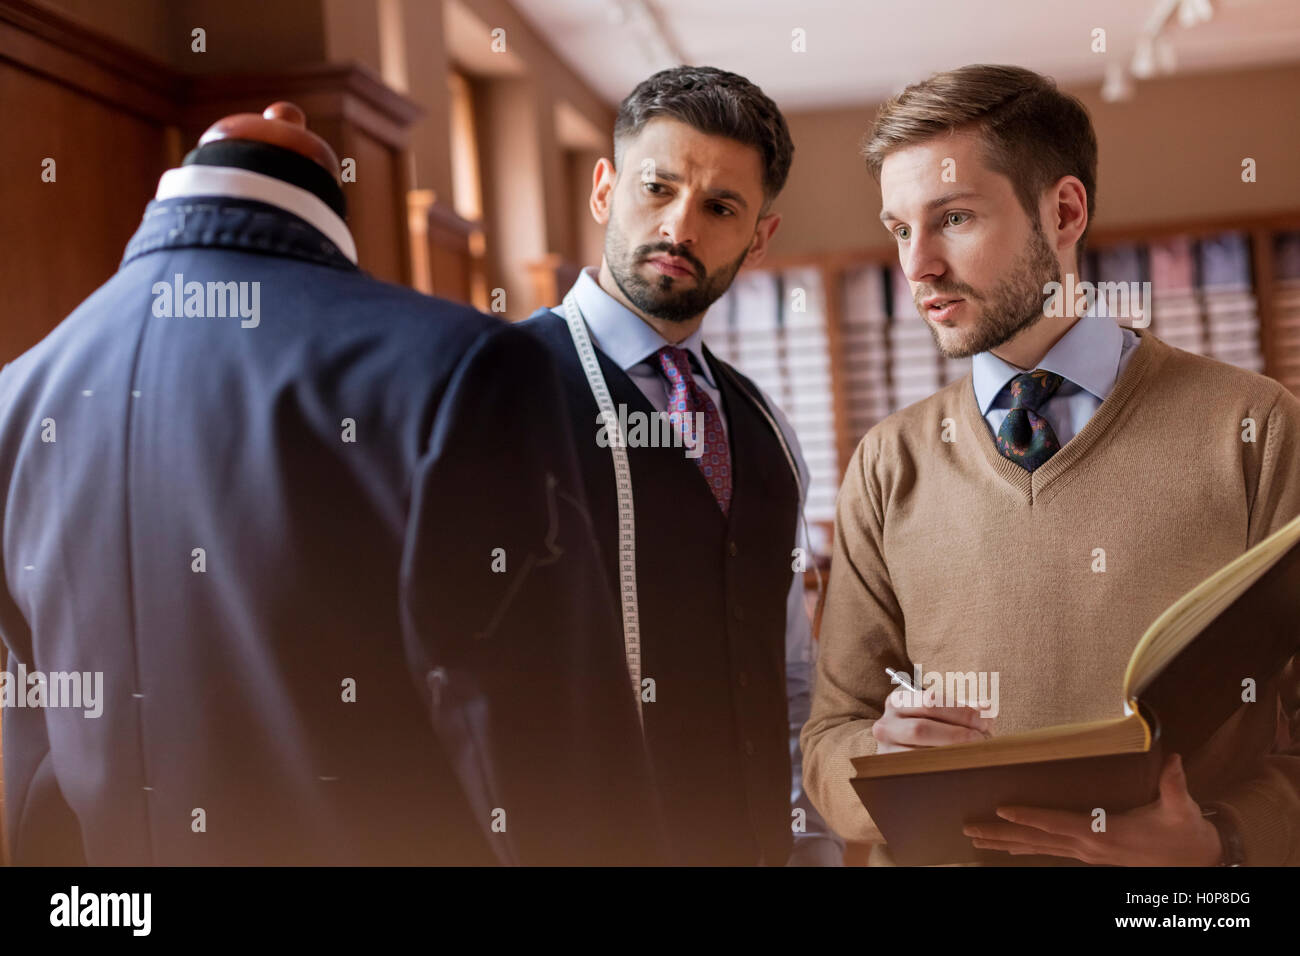 tailor suit taking notes menswear shop Stock Photo